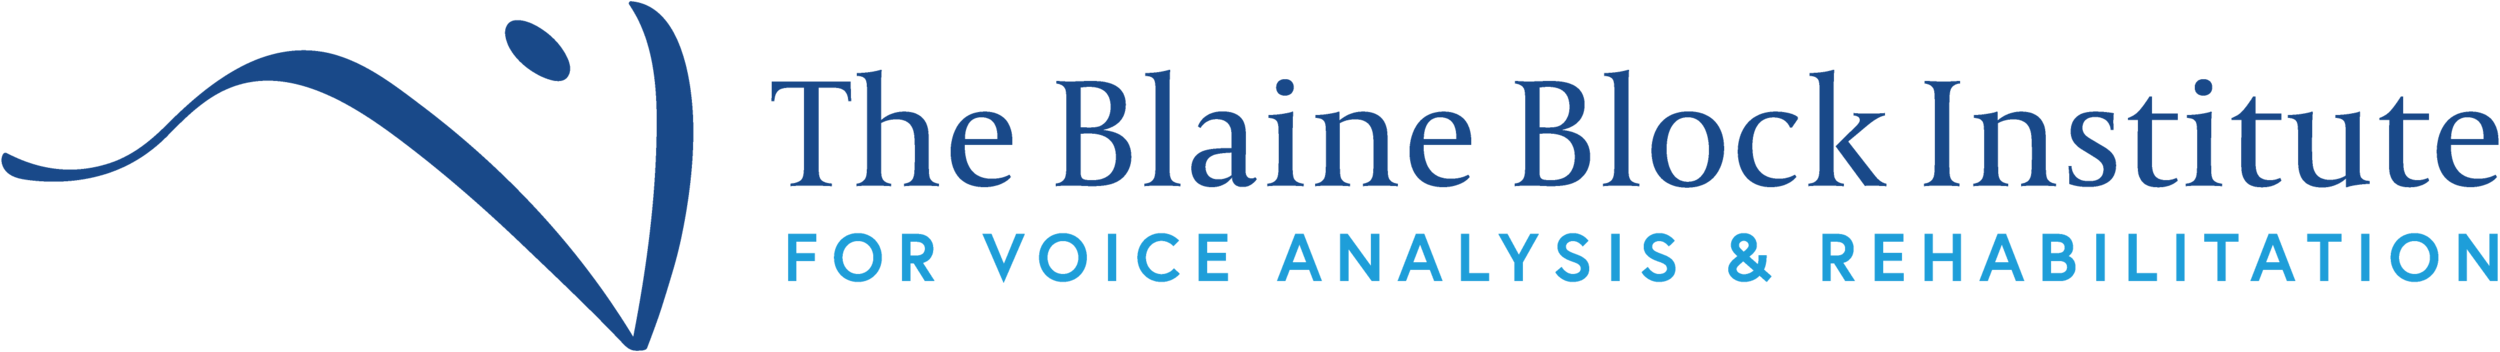 The Blaine Block Institute for Voice Analysis and Rehabilitation